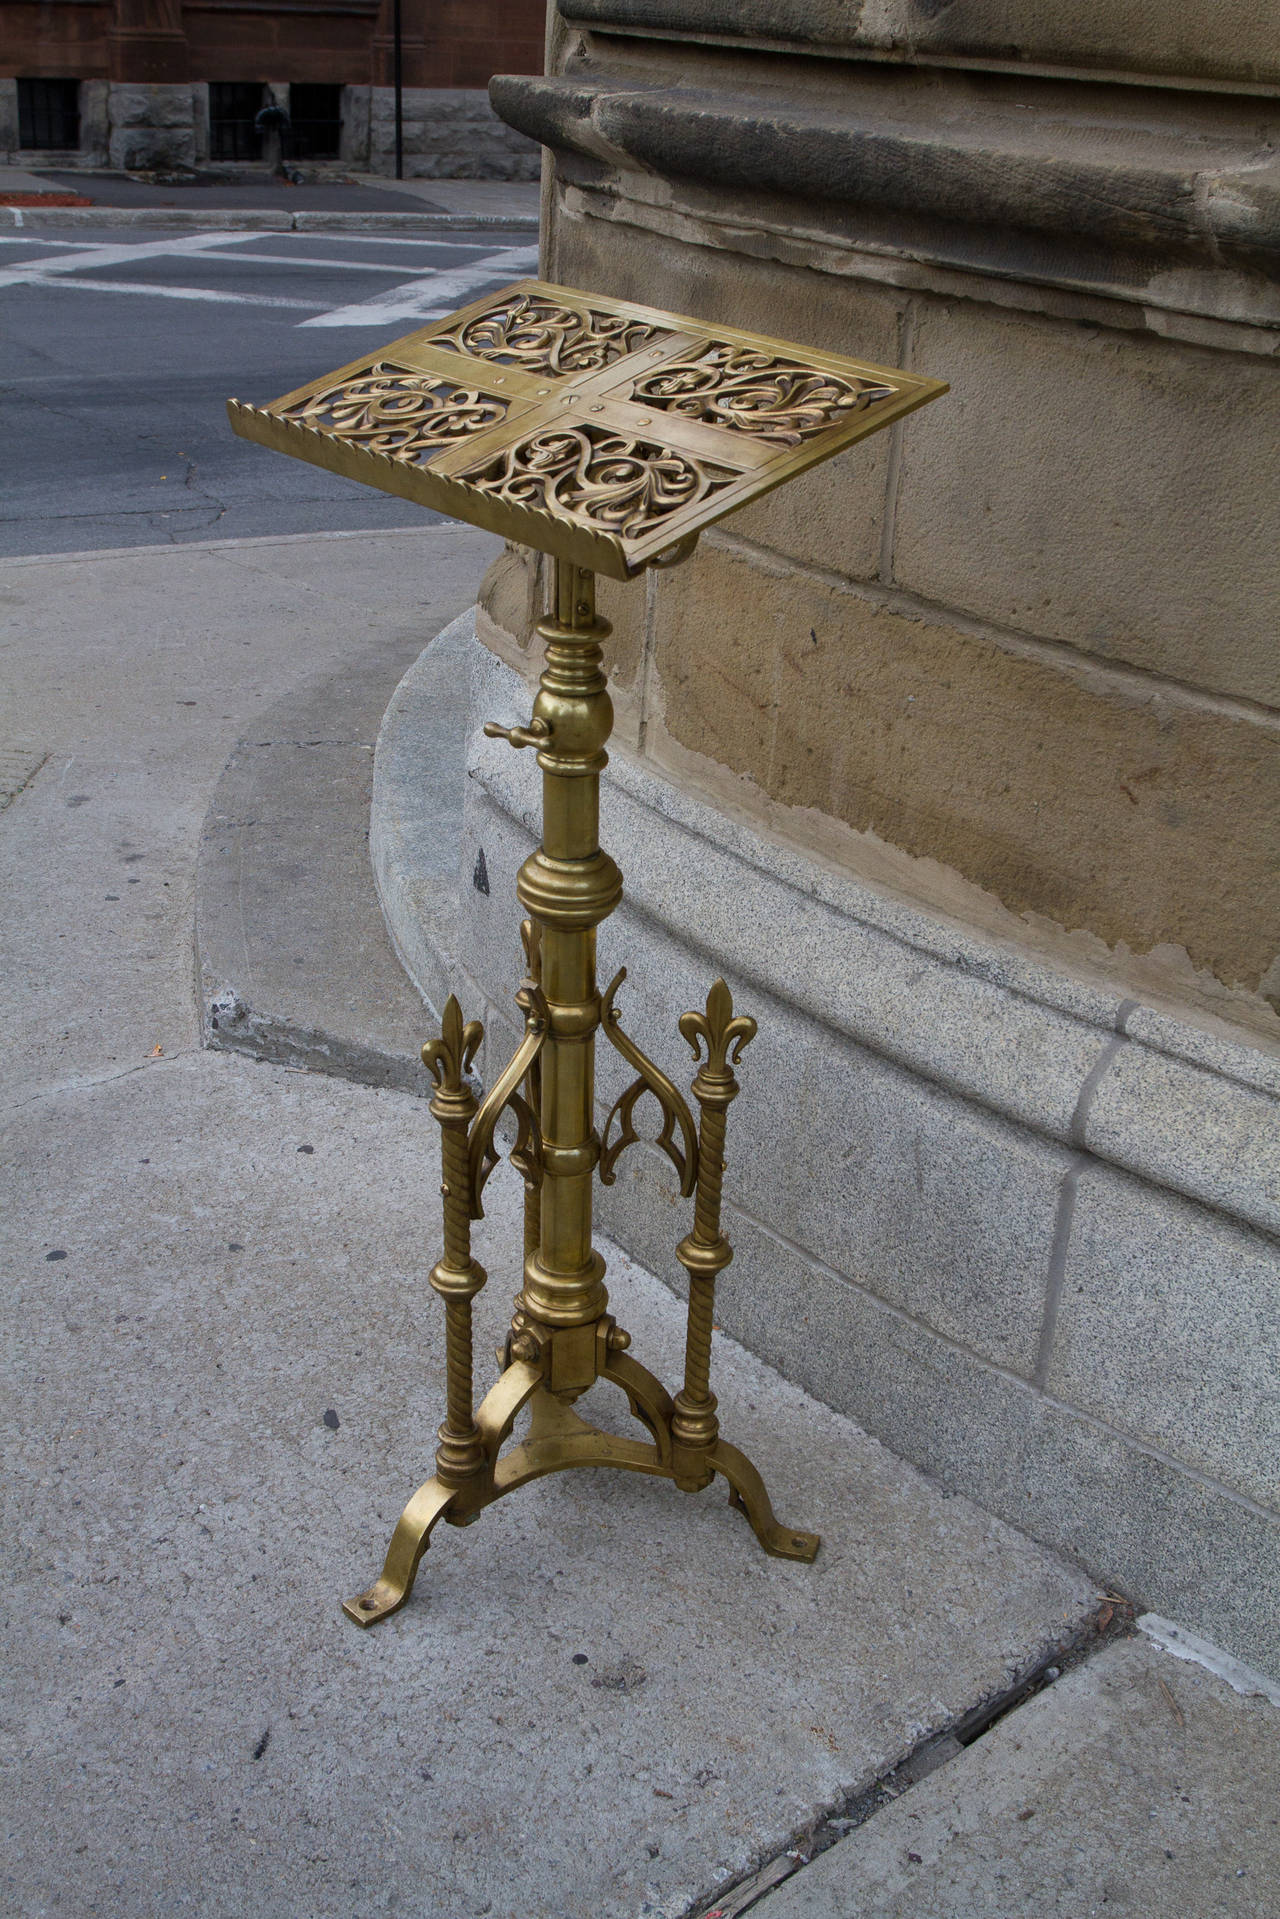 Highly original and unique solid cast brass neogothic style lectern, could also be used as a music stand. Decorated with fleur de lys, flowers and gothic attributes. By Keith and Fitzsimons. Signed on base: Keith and Fitzsimons. 

Keith and